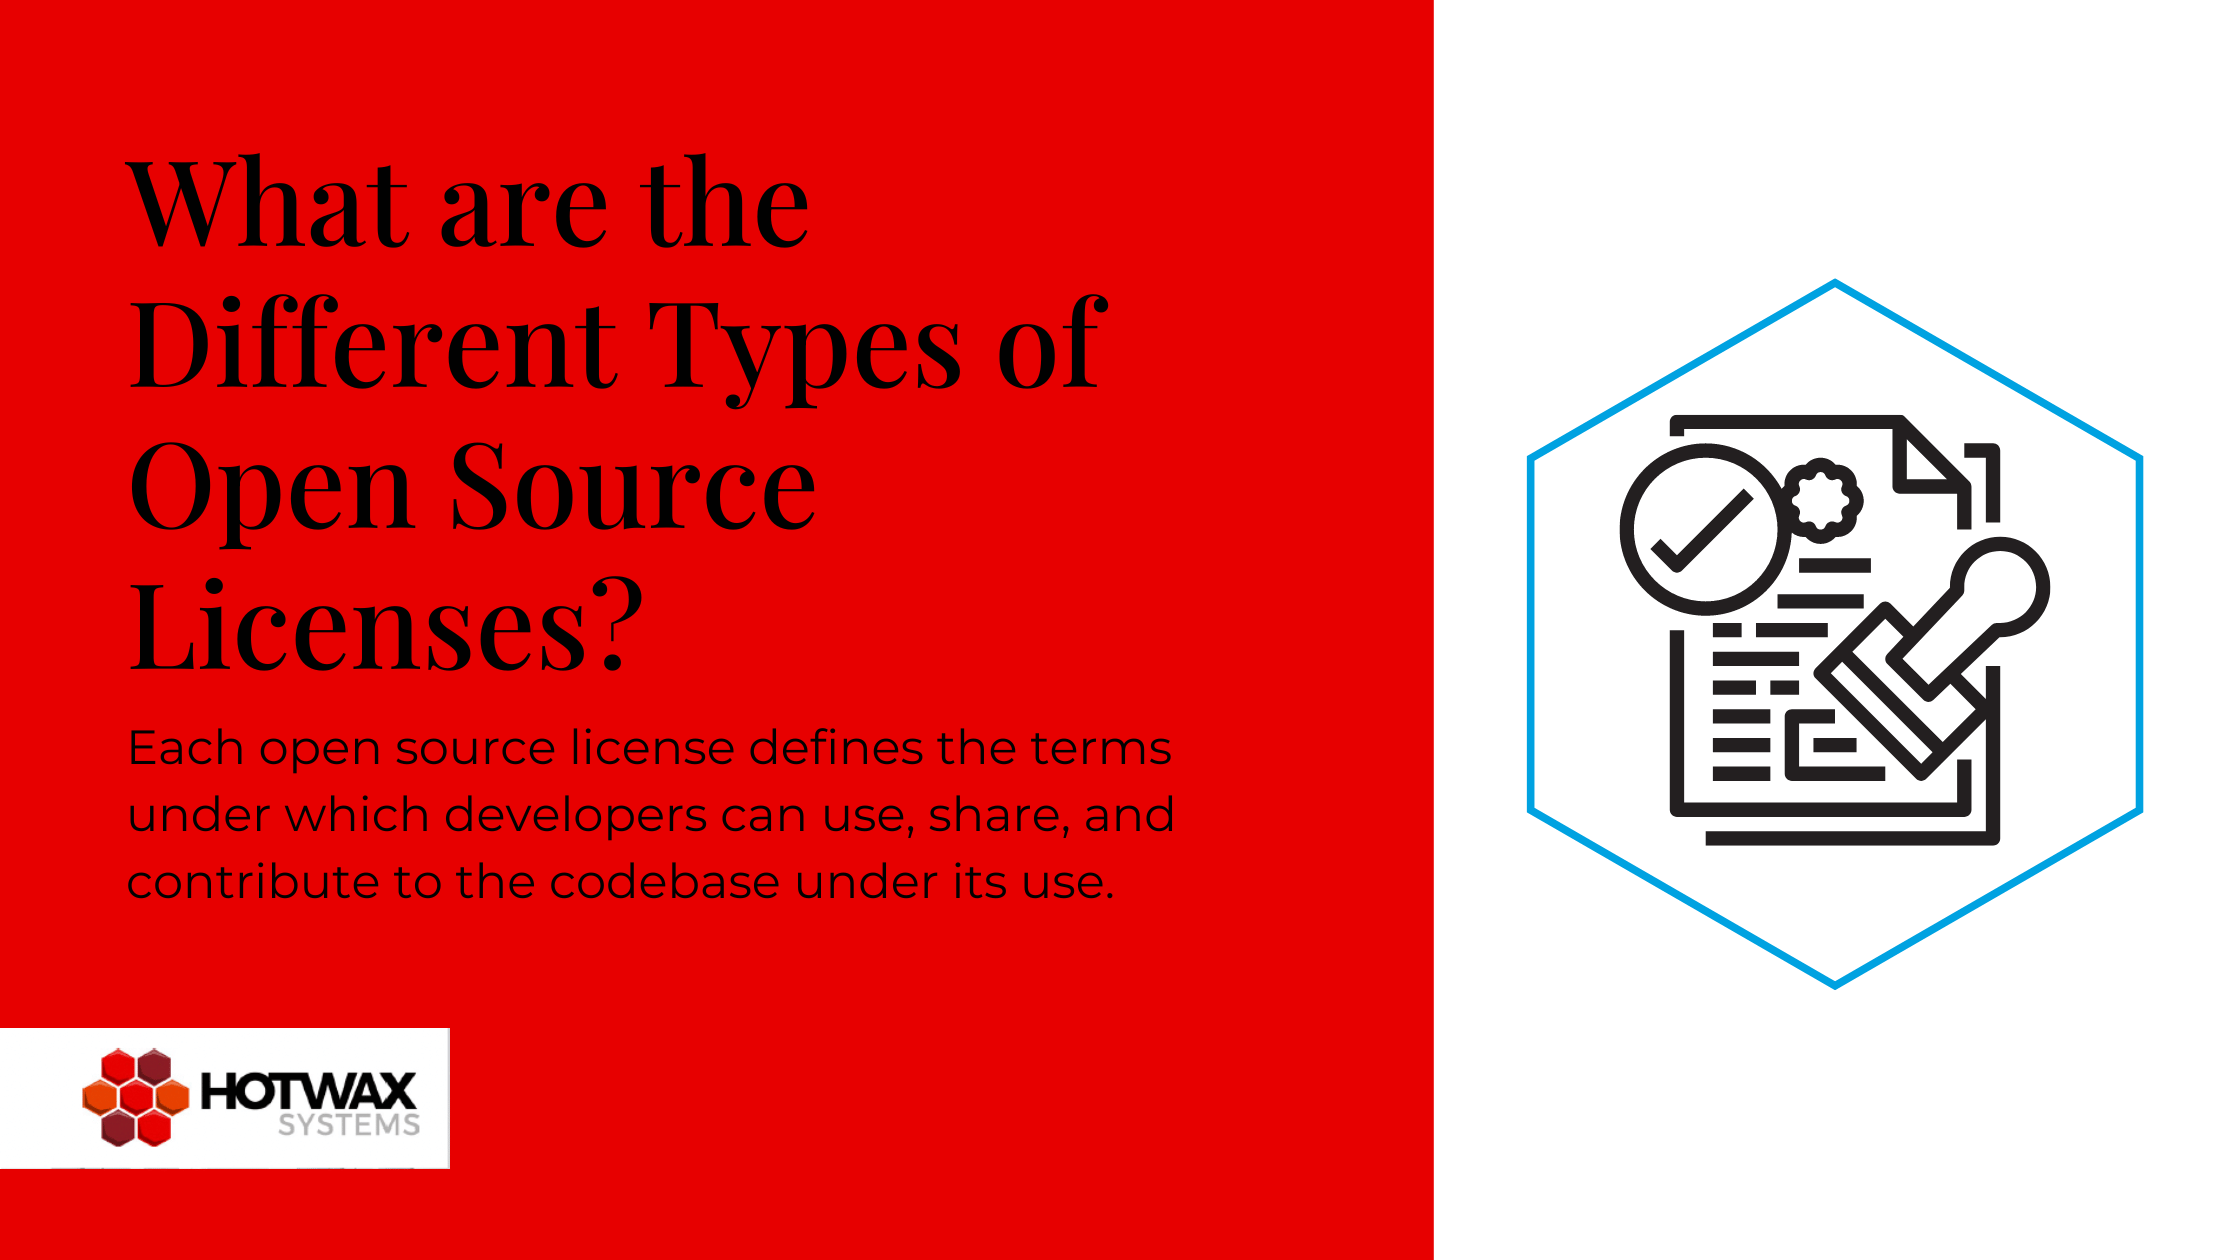 What are the different types of open source licenses?